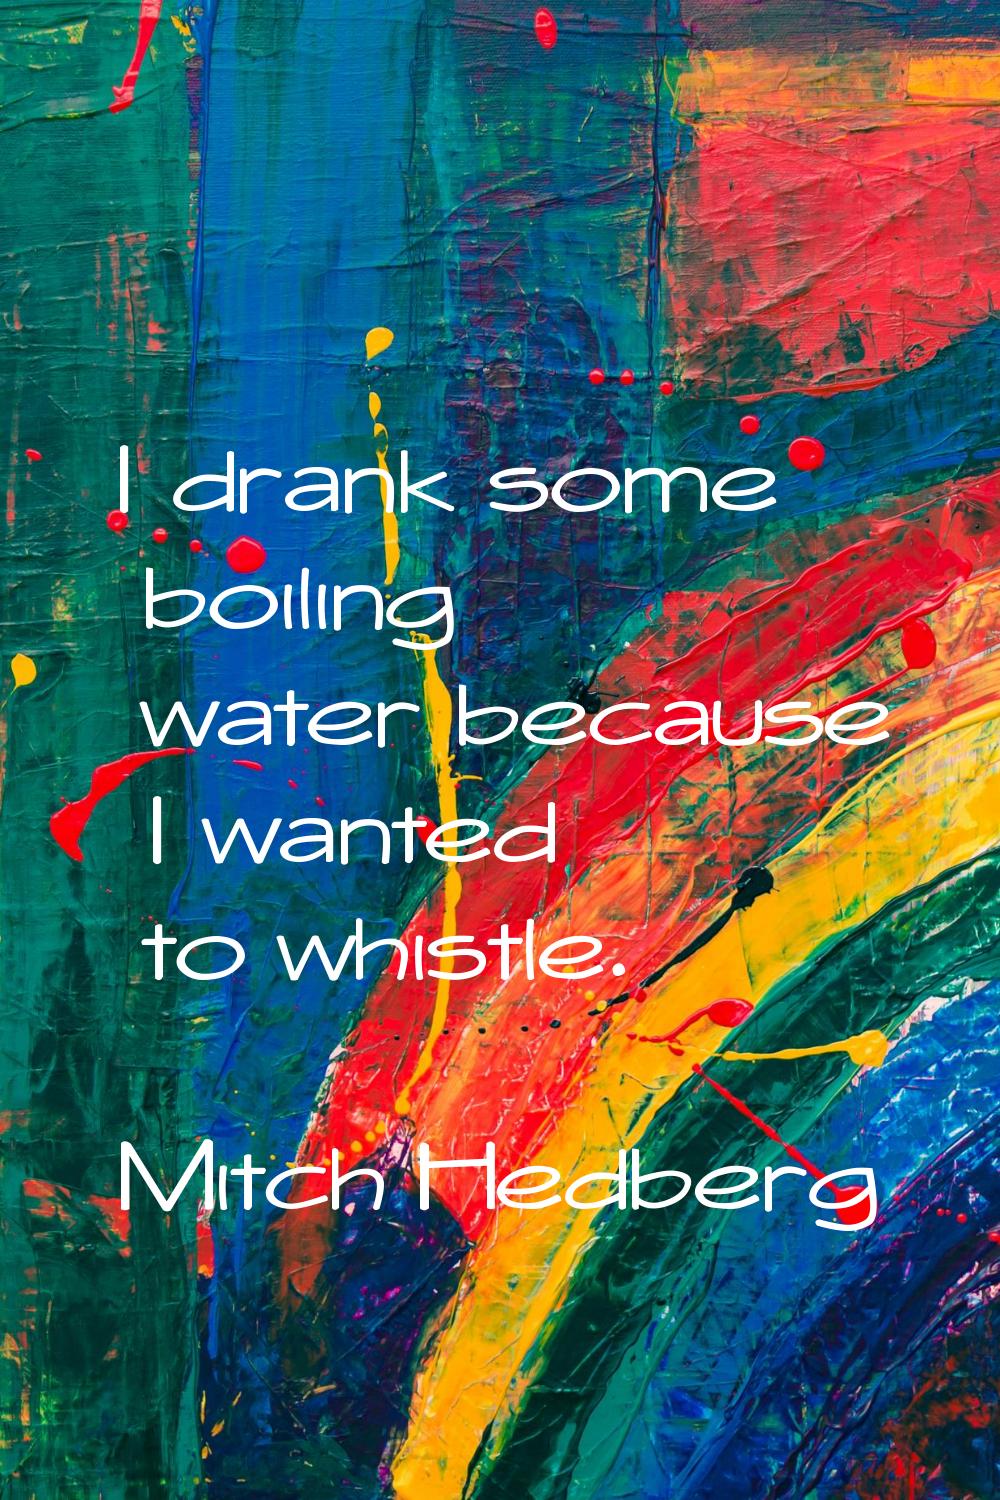 I drank some boiling water because I wanted to whistle.